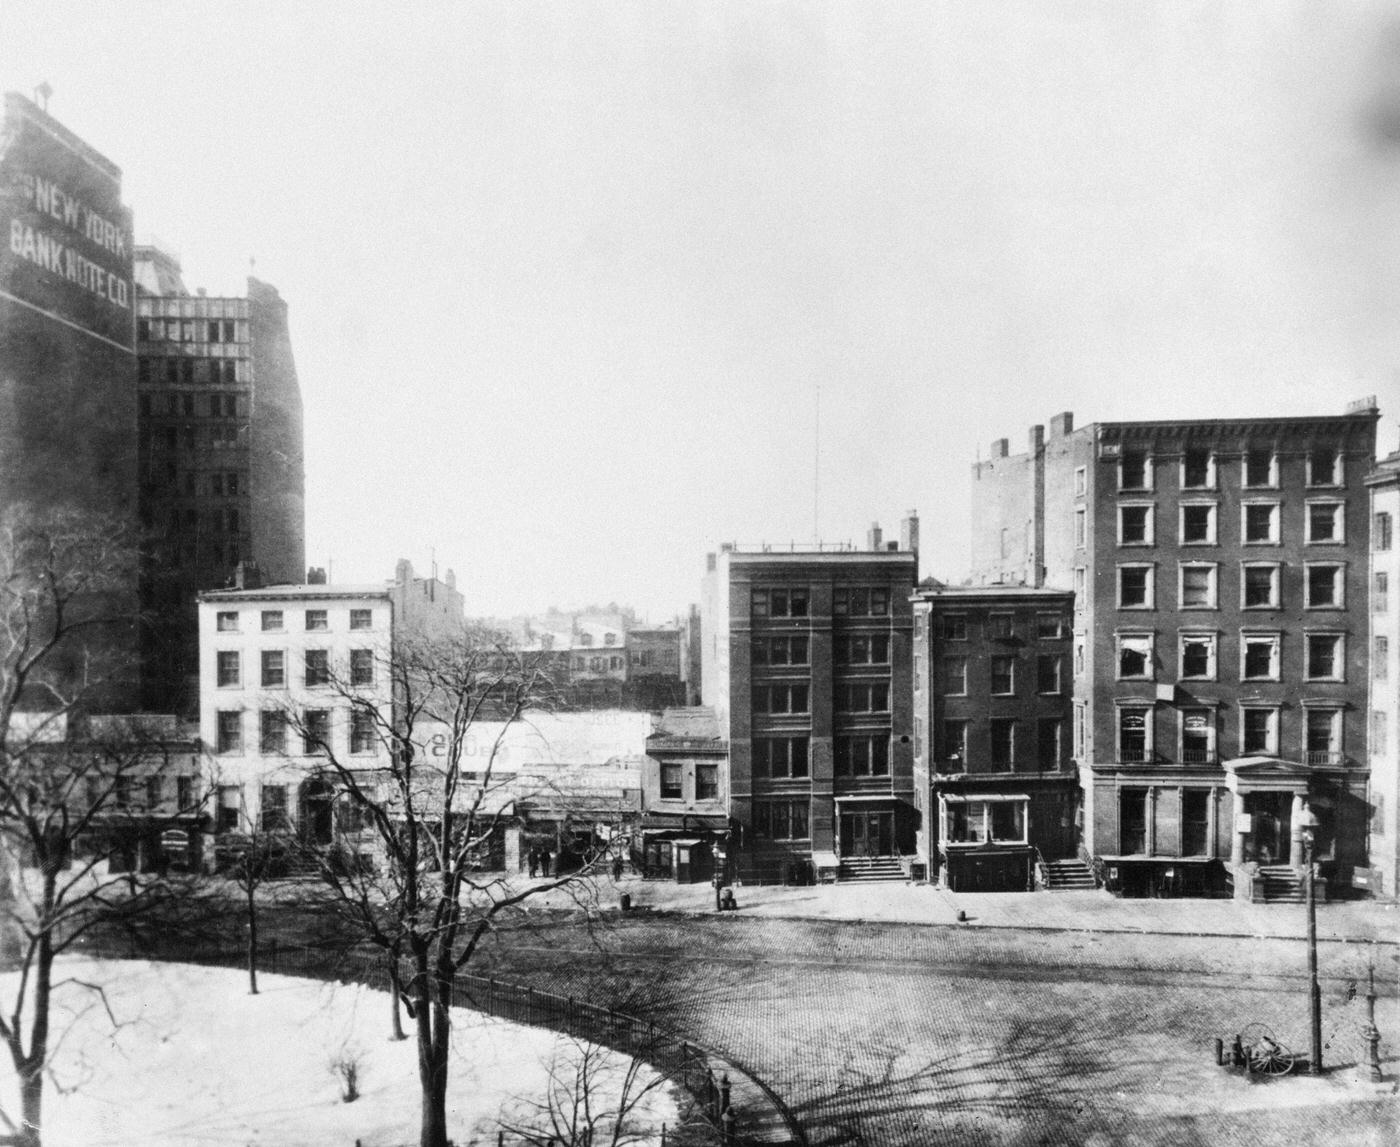 Broadway In 1880